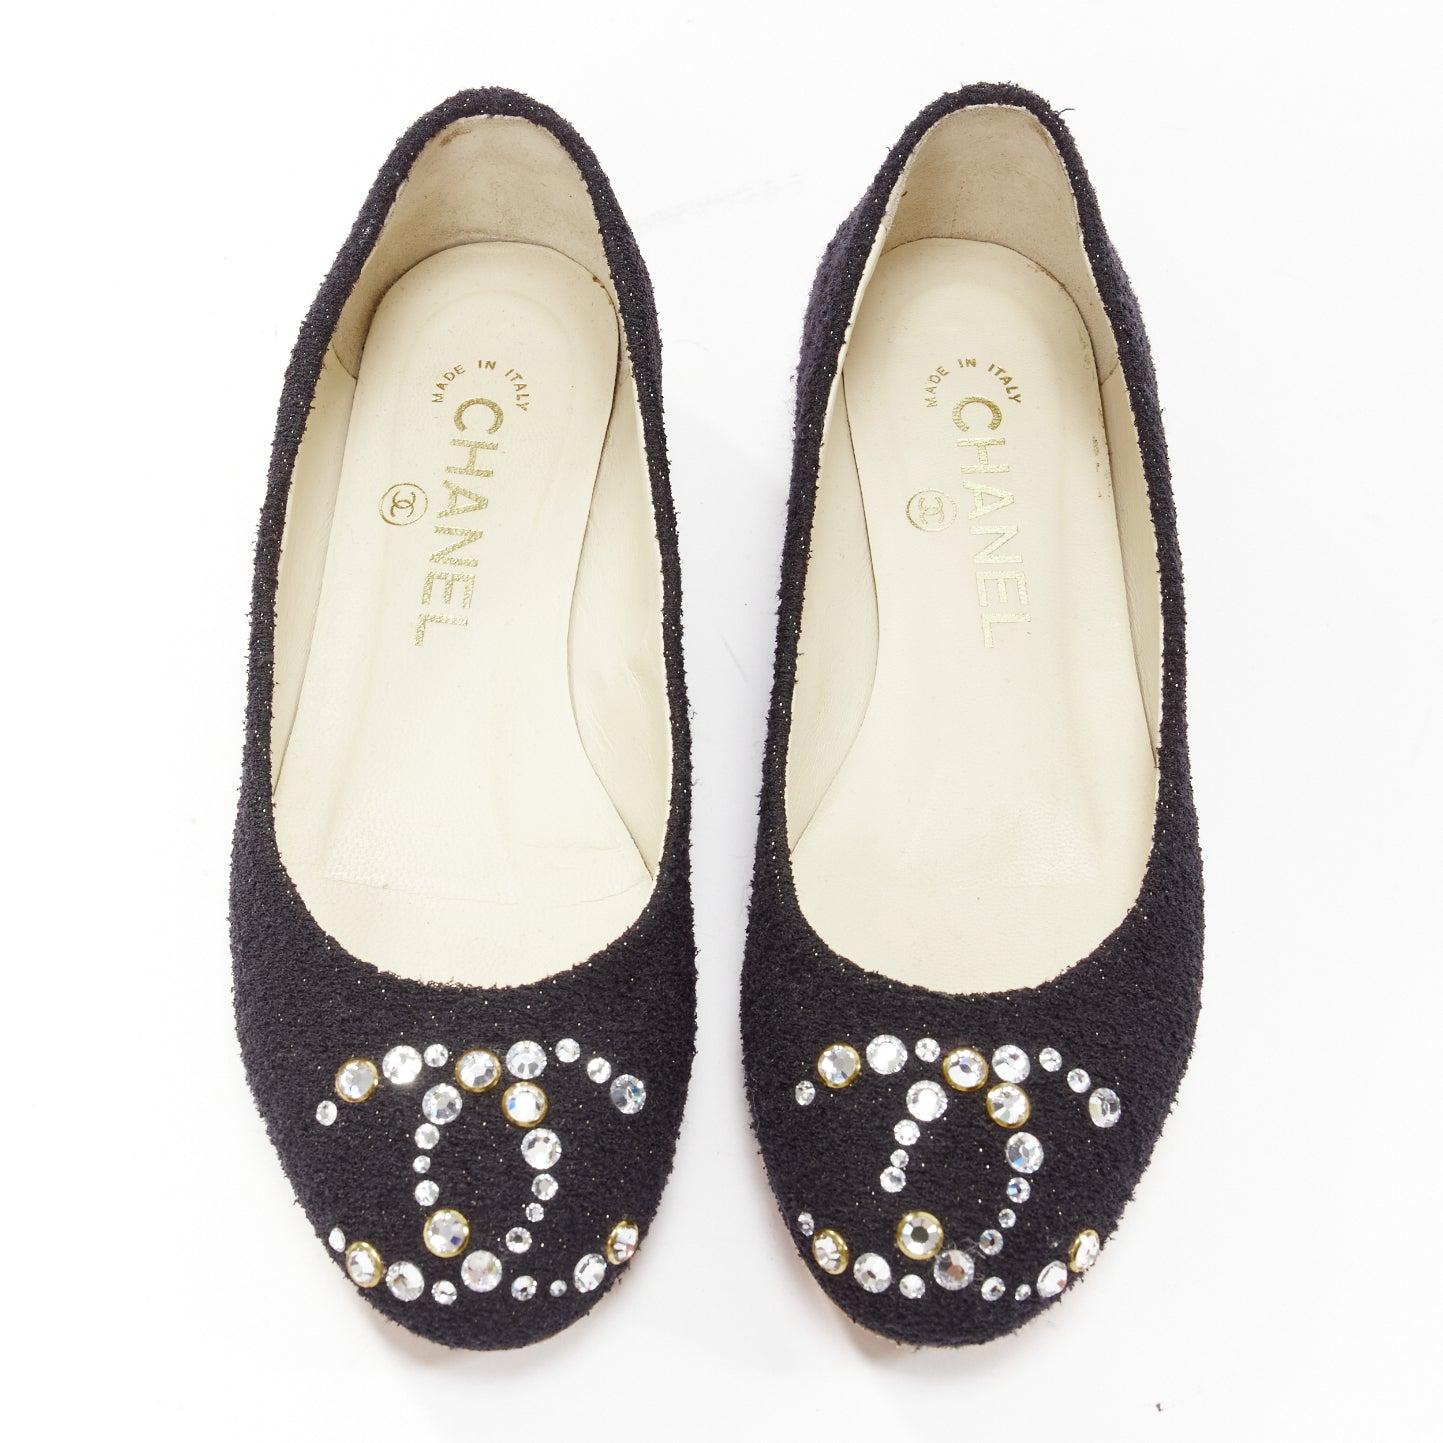 CHANEL black tweed crystal CC embellished logo round toe flat shoes EU35
Reference: YIKK/A00077
Brand: Chanel
Material: Tweed
Color: Black, Clear
Pattern: Tweed
Closure: Slip On
Lining: Nude Leather
Extra Details: Shiny cork soles.
Made in: